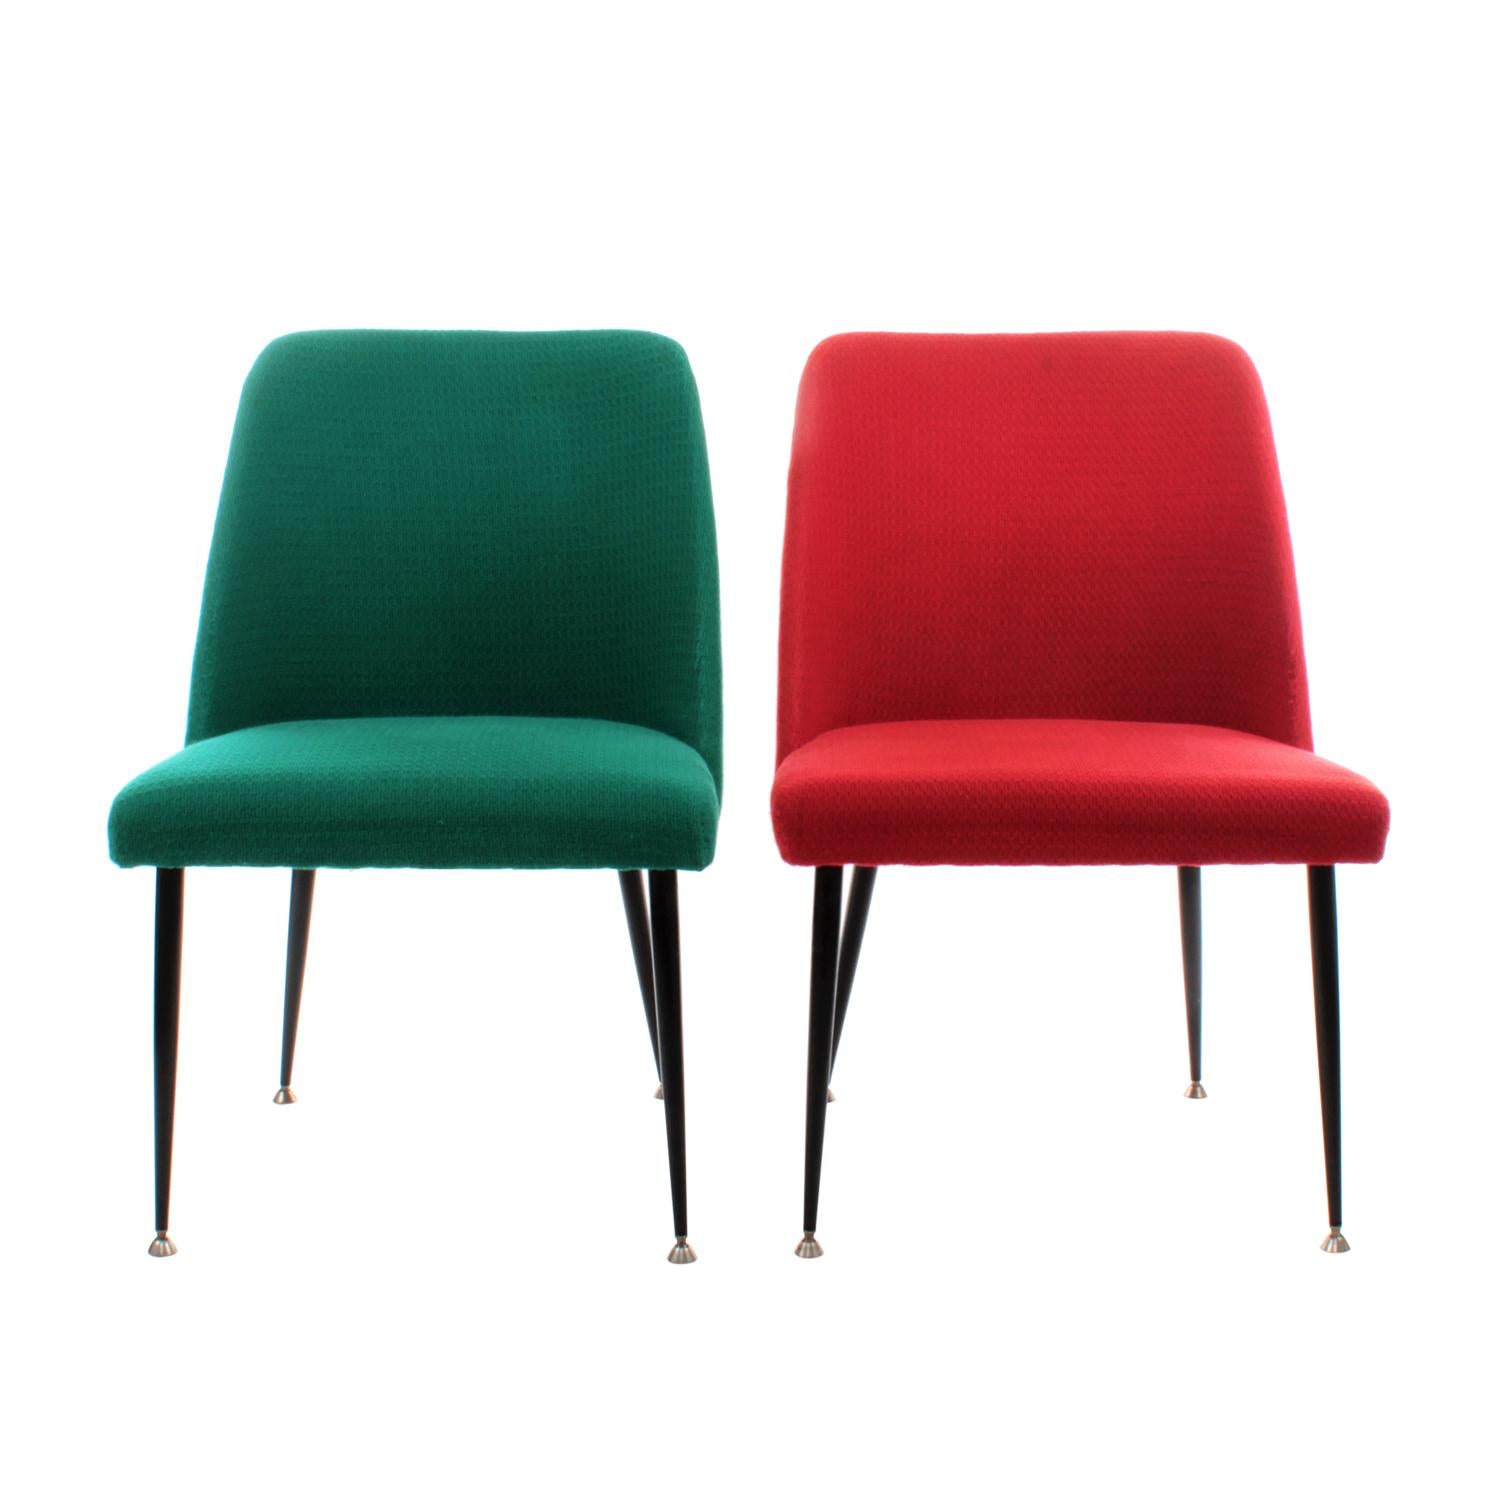 Pair of accent chairs - stylish pair of 1950s accent chairs by unknown producer - beautiful set of midcentury Danish chairs in teal green and dusty red.

A pair of slipper chairs with woven fabric upholstery and tapered black lacquered legs with